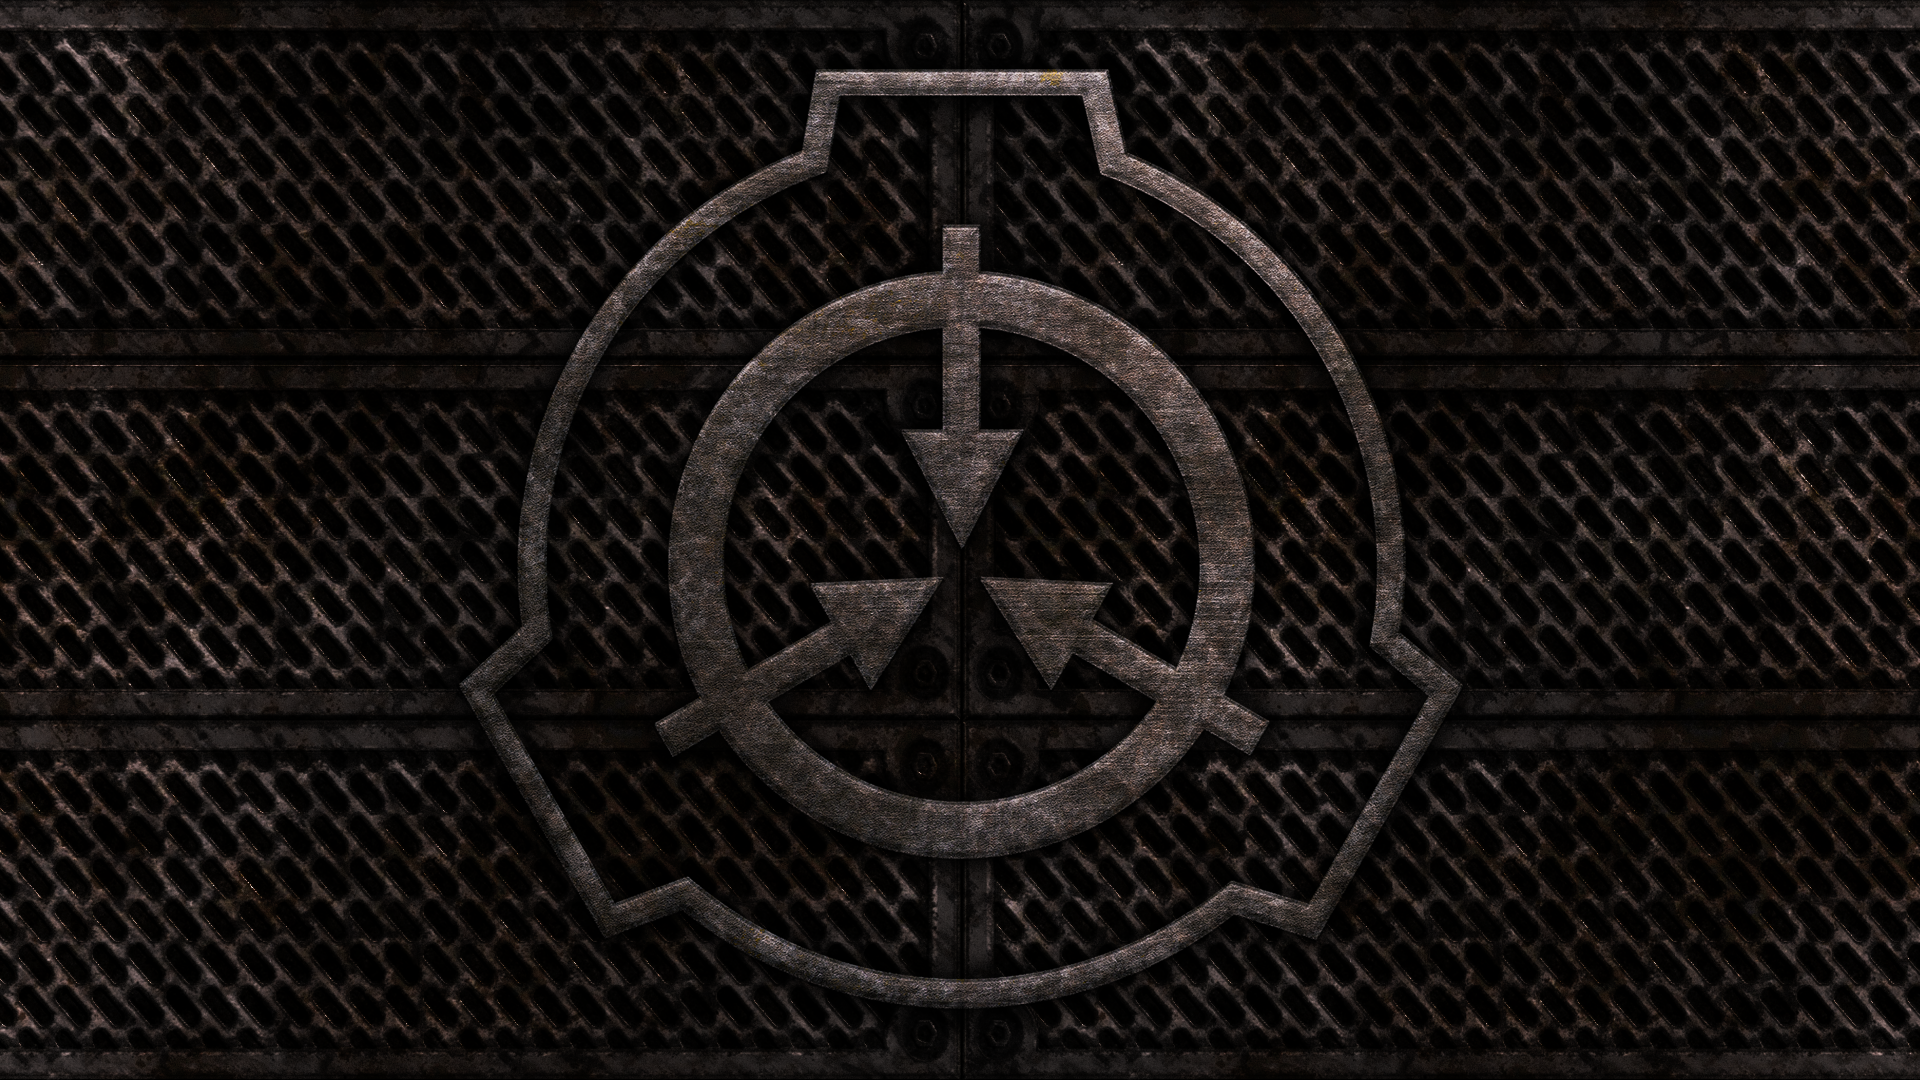 Black logo without backgrounds scp